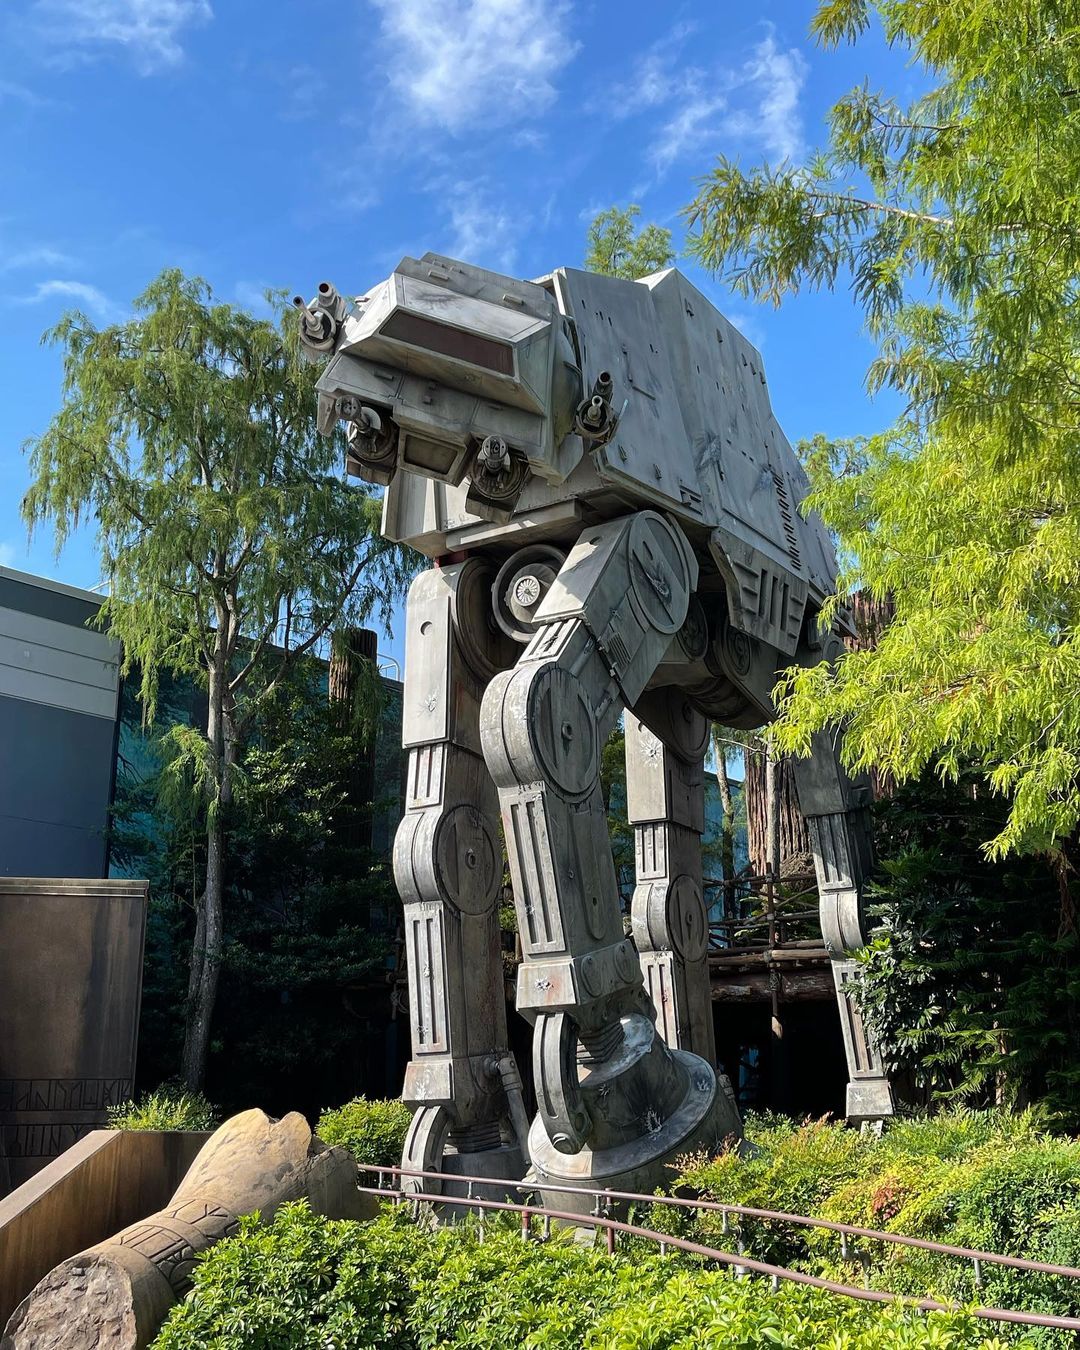 Star Tours Les aventures continuent - Attraction Hollywood Studios (1)